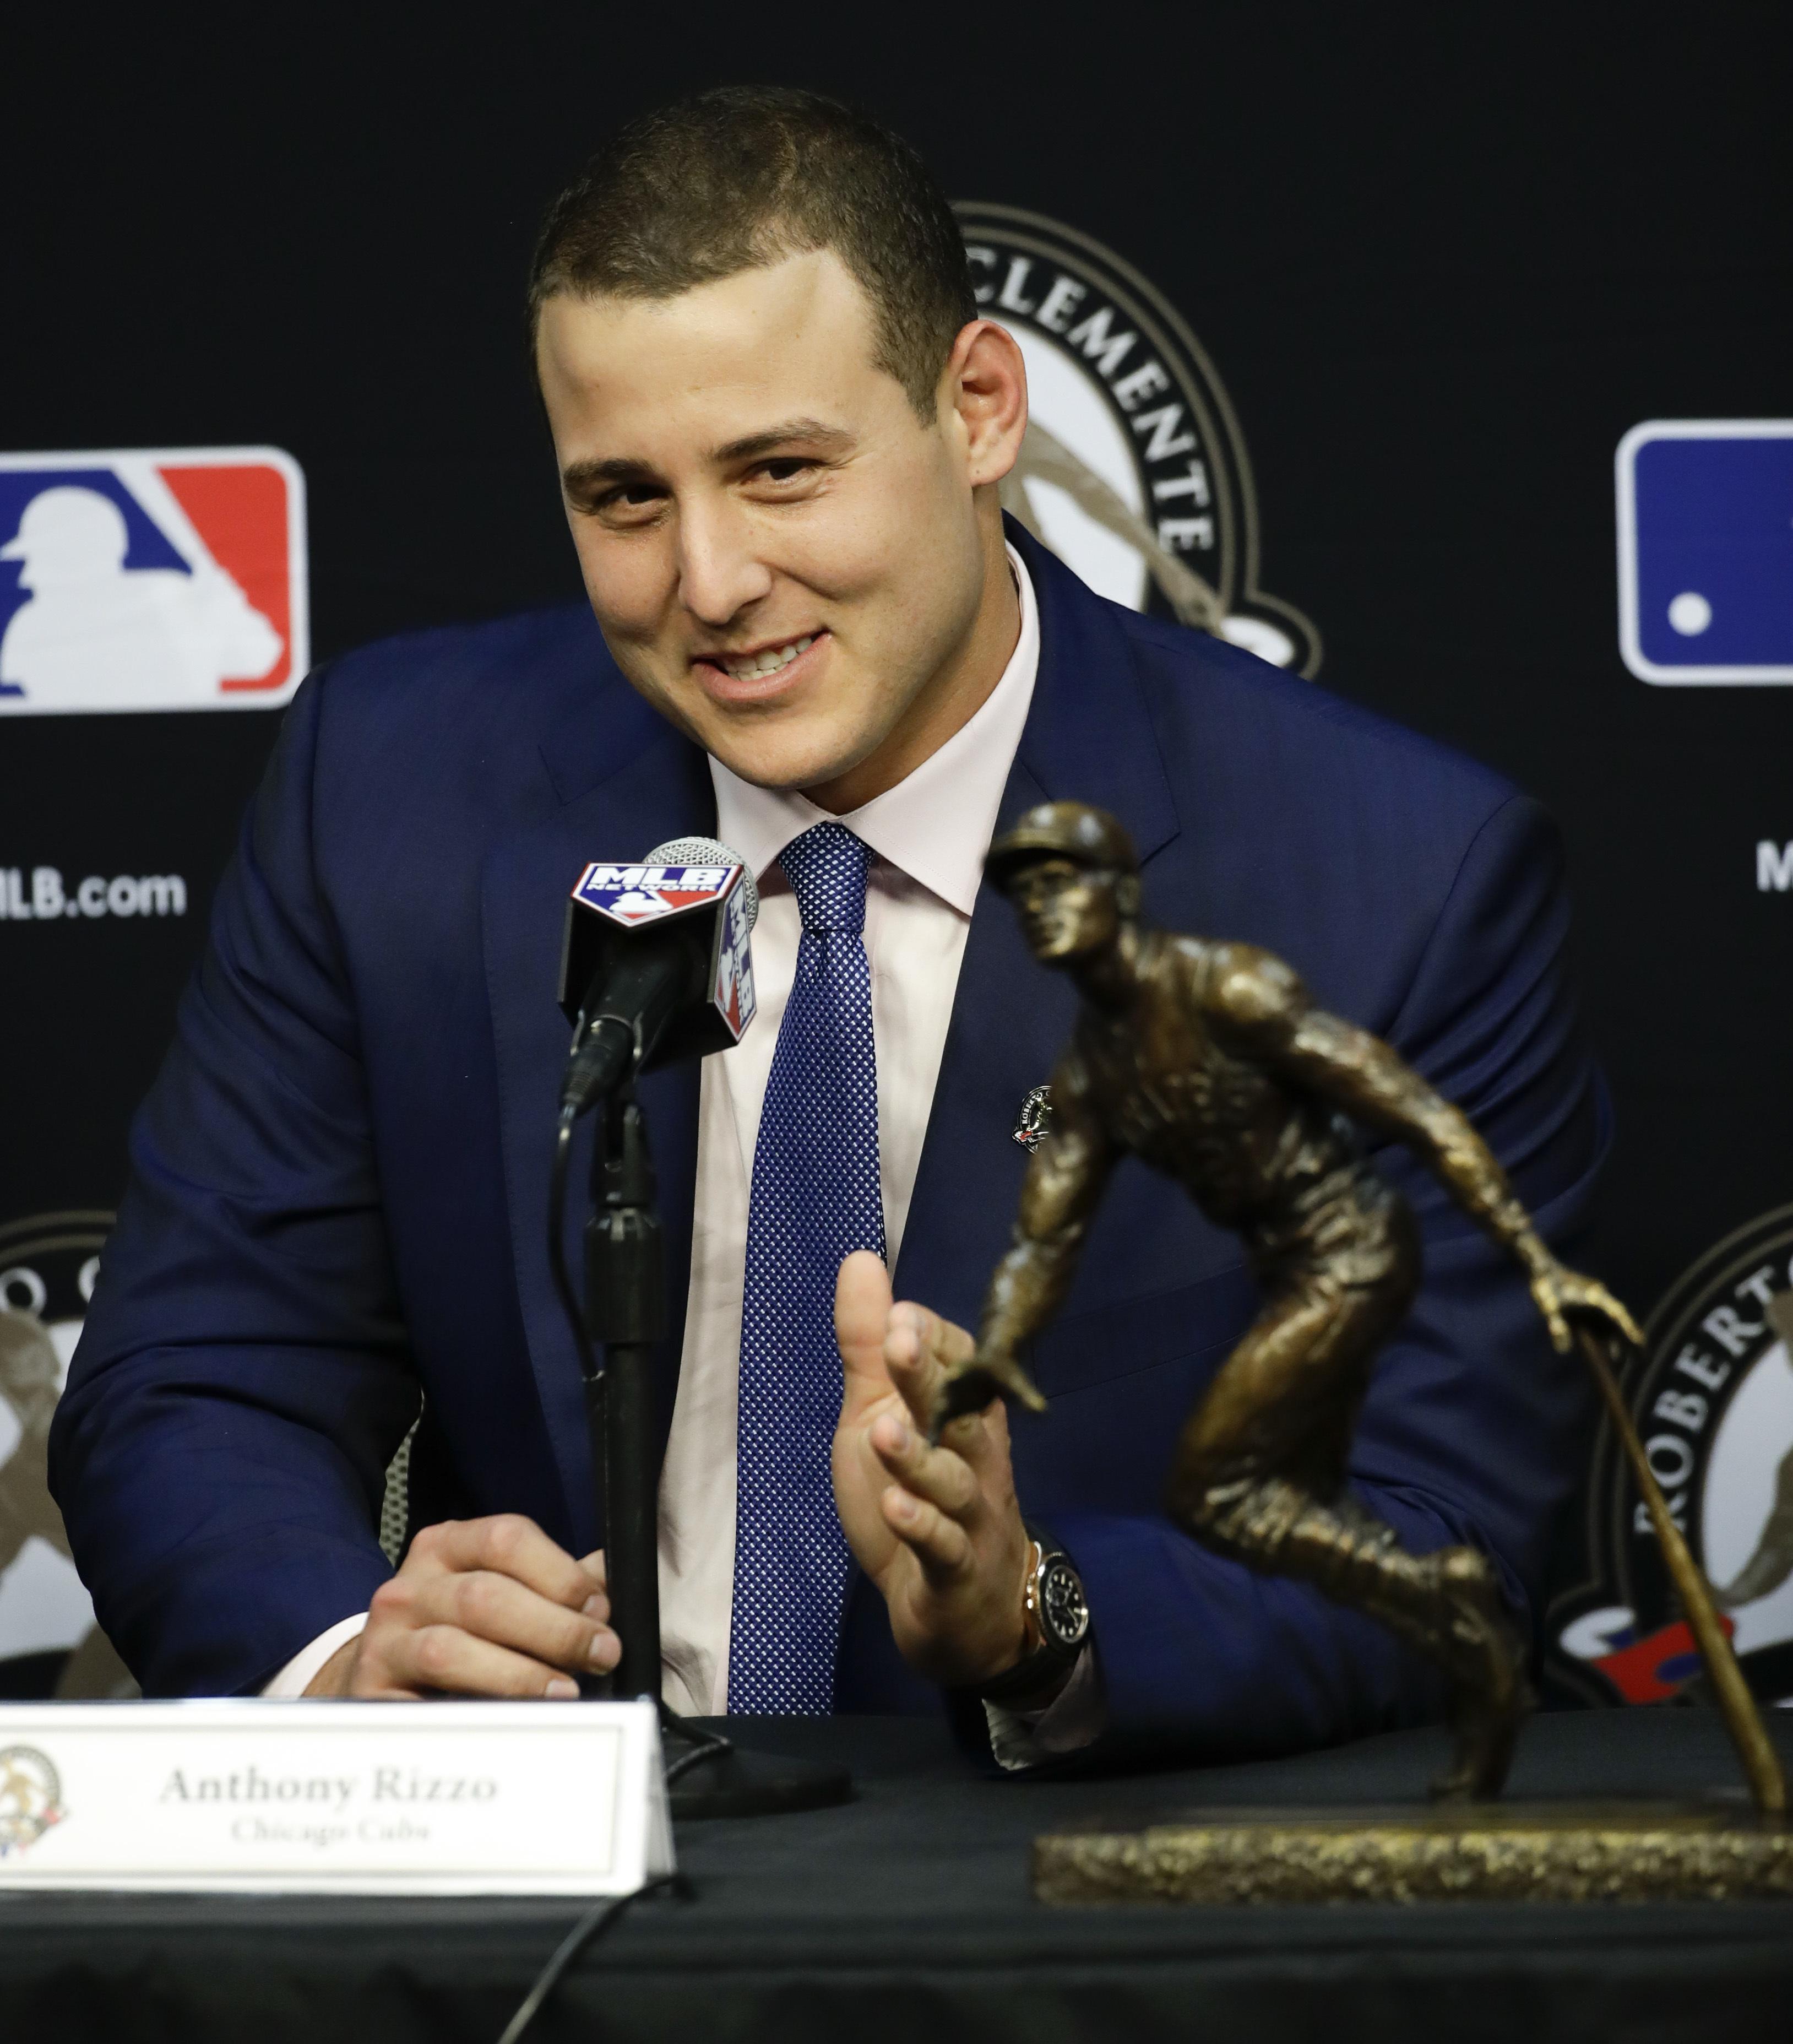 Cubs first baseman Anthony Rizzo, a cancer survivor, says he's